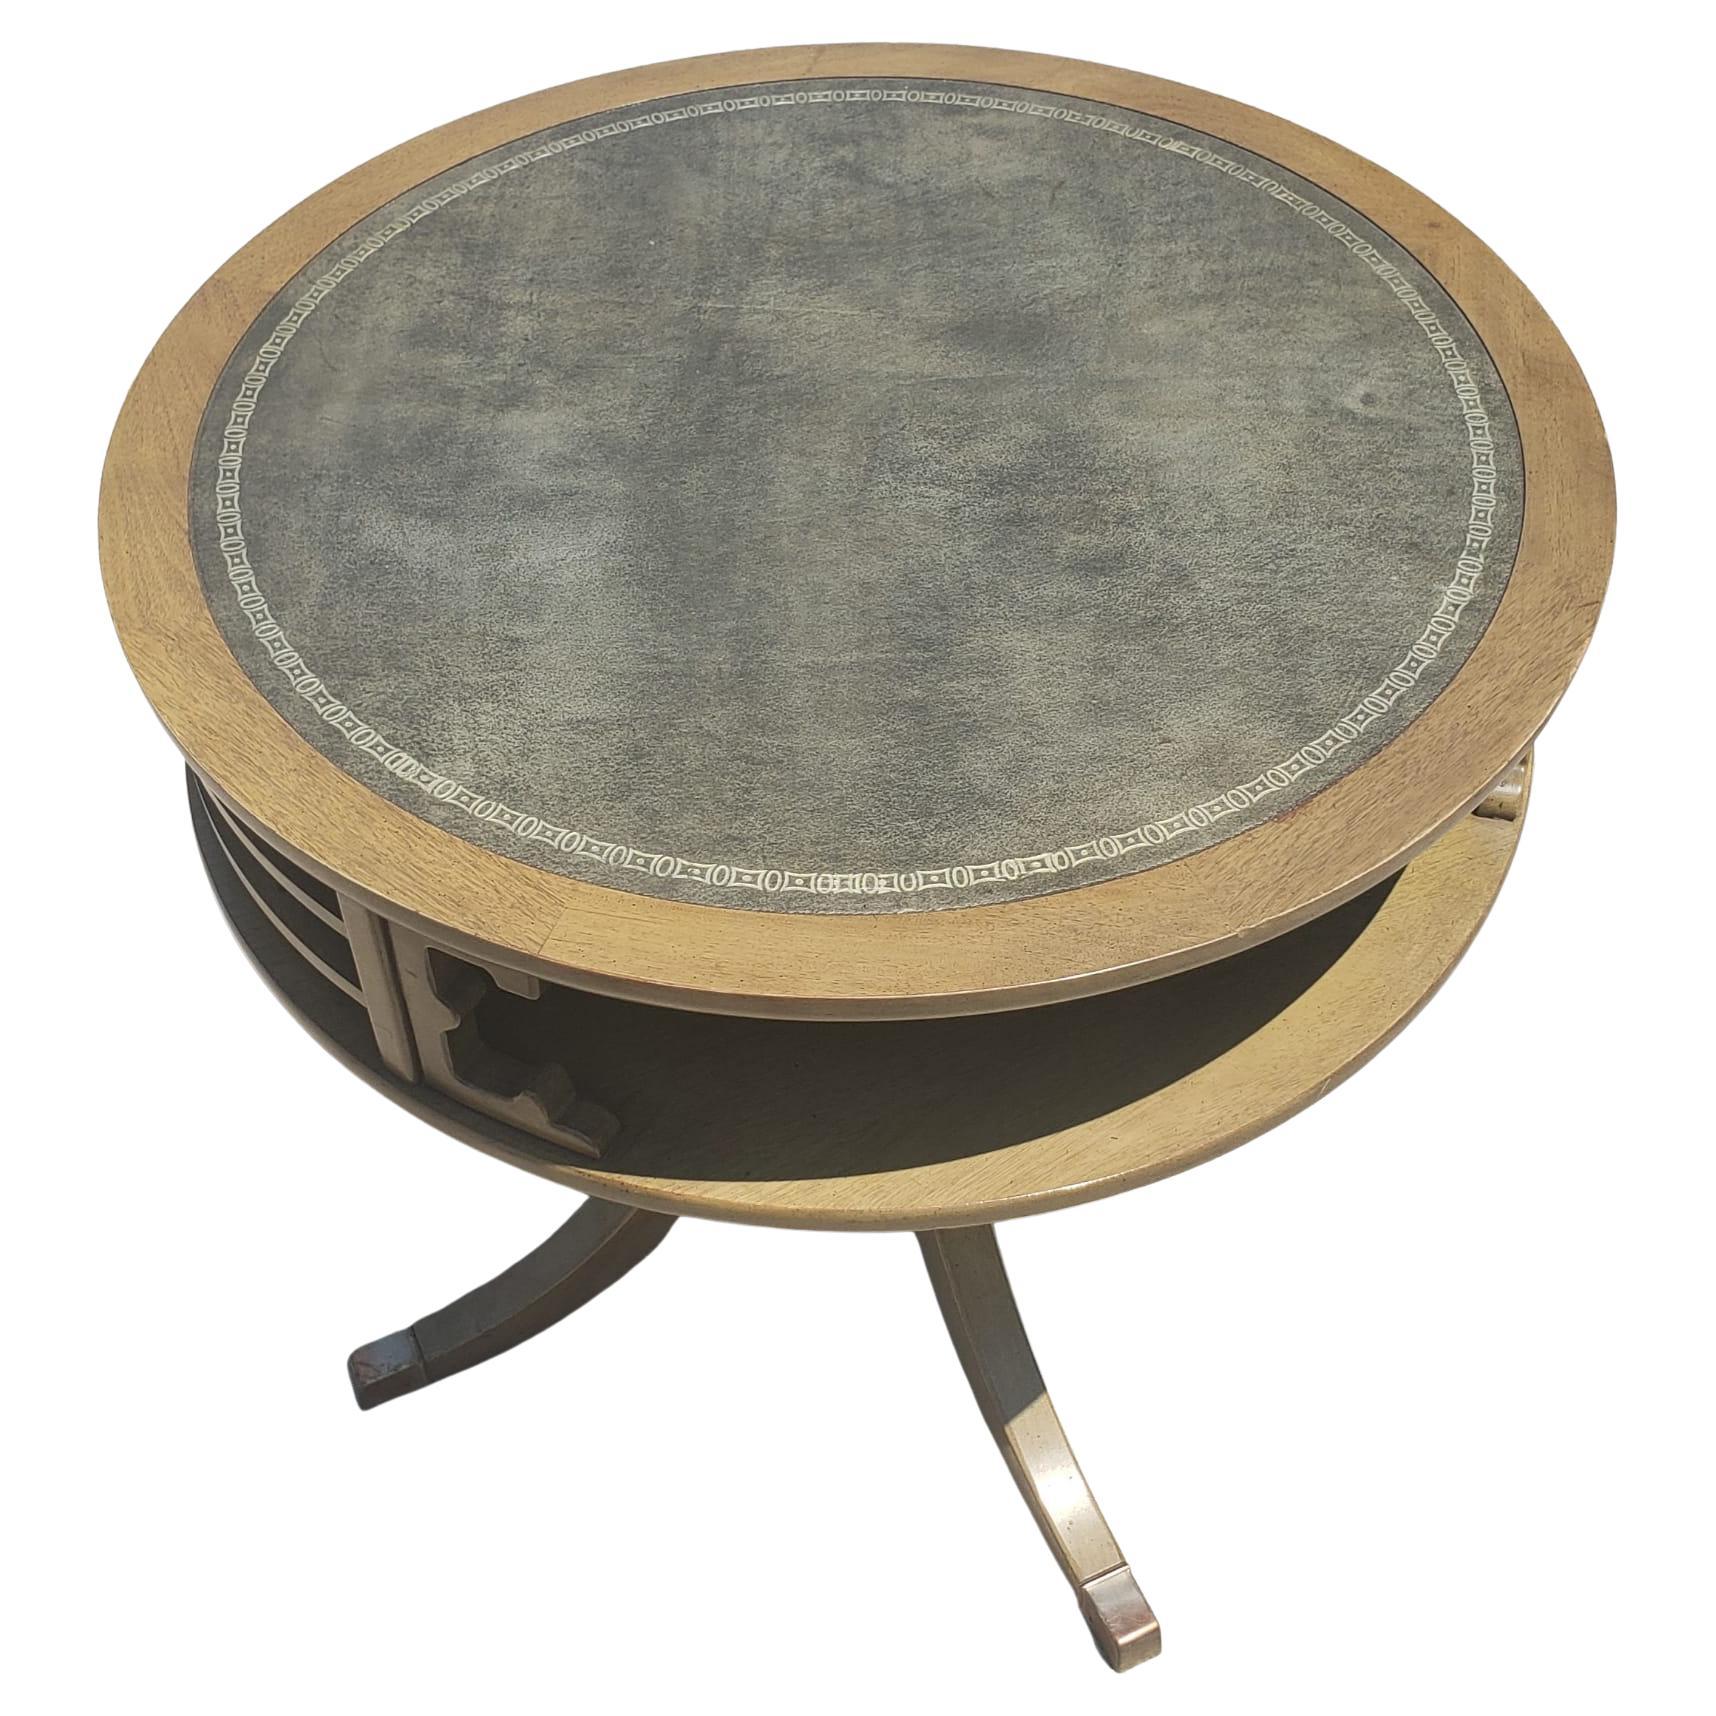 Other Mid-Century Two-Tier Quad Pad Pedestal Drum Table with Stenciled Leather Top For Sale